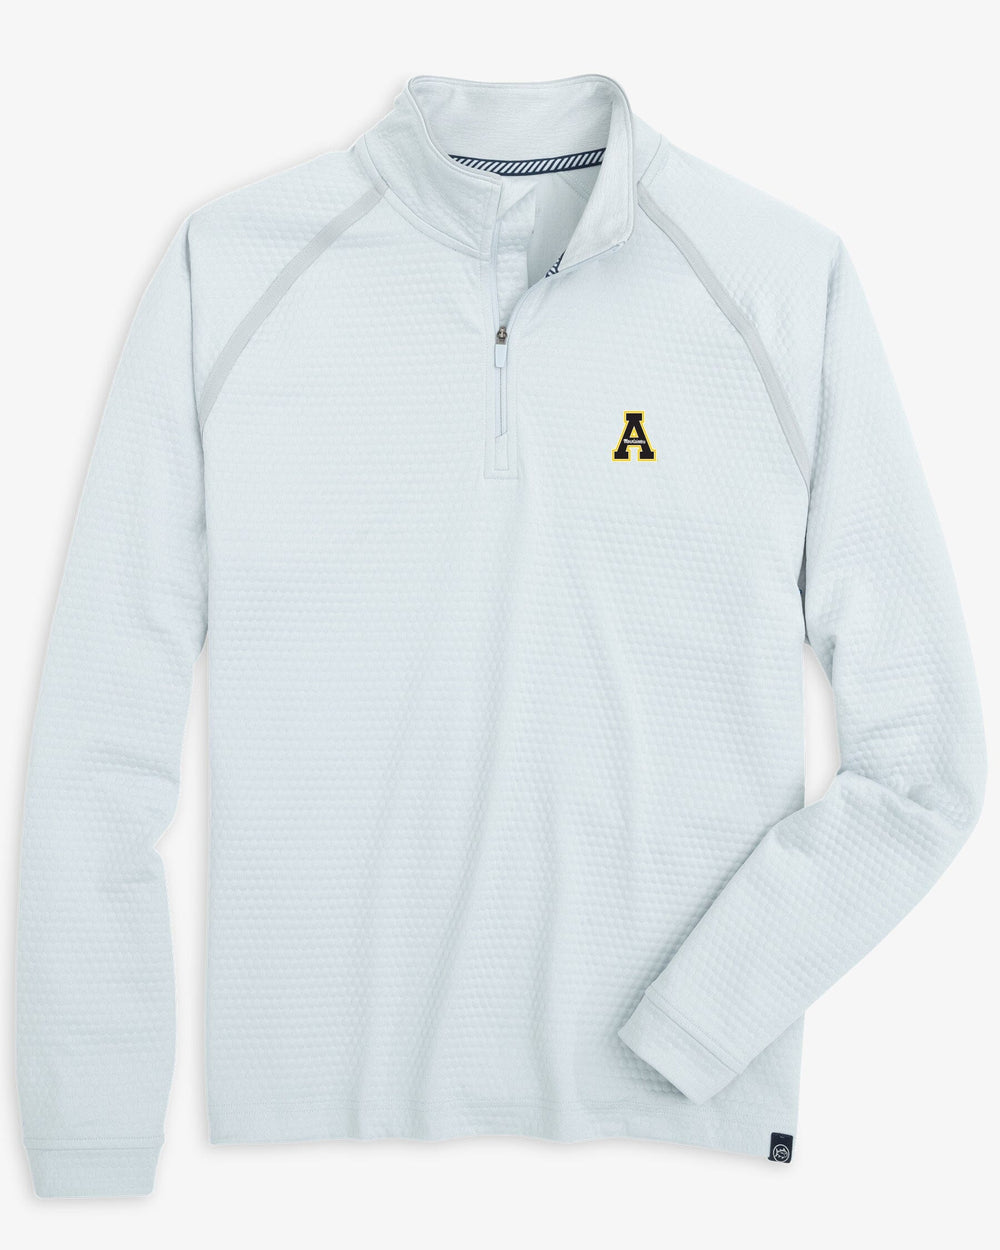 The front view of the App State Scuttle Heather Quarter Zip by Southern Tide - Heather Slate Grey